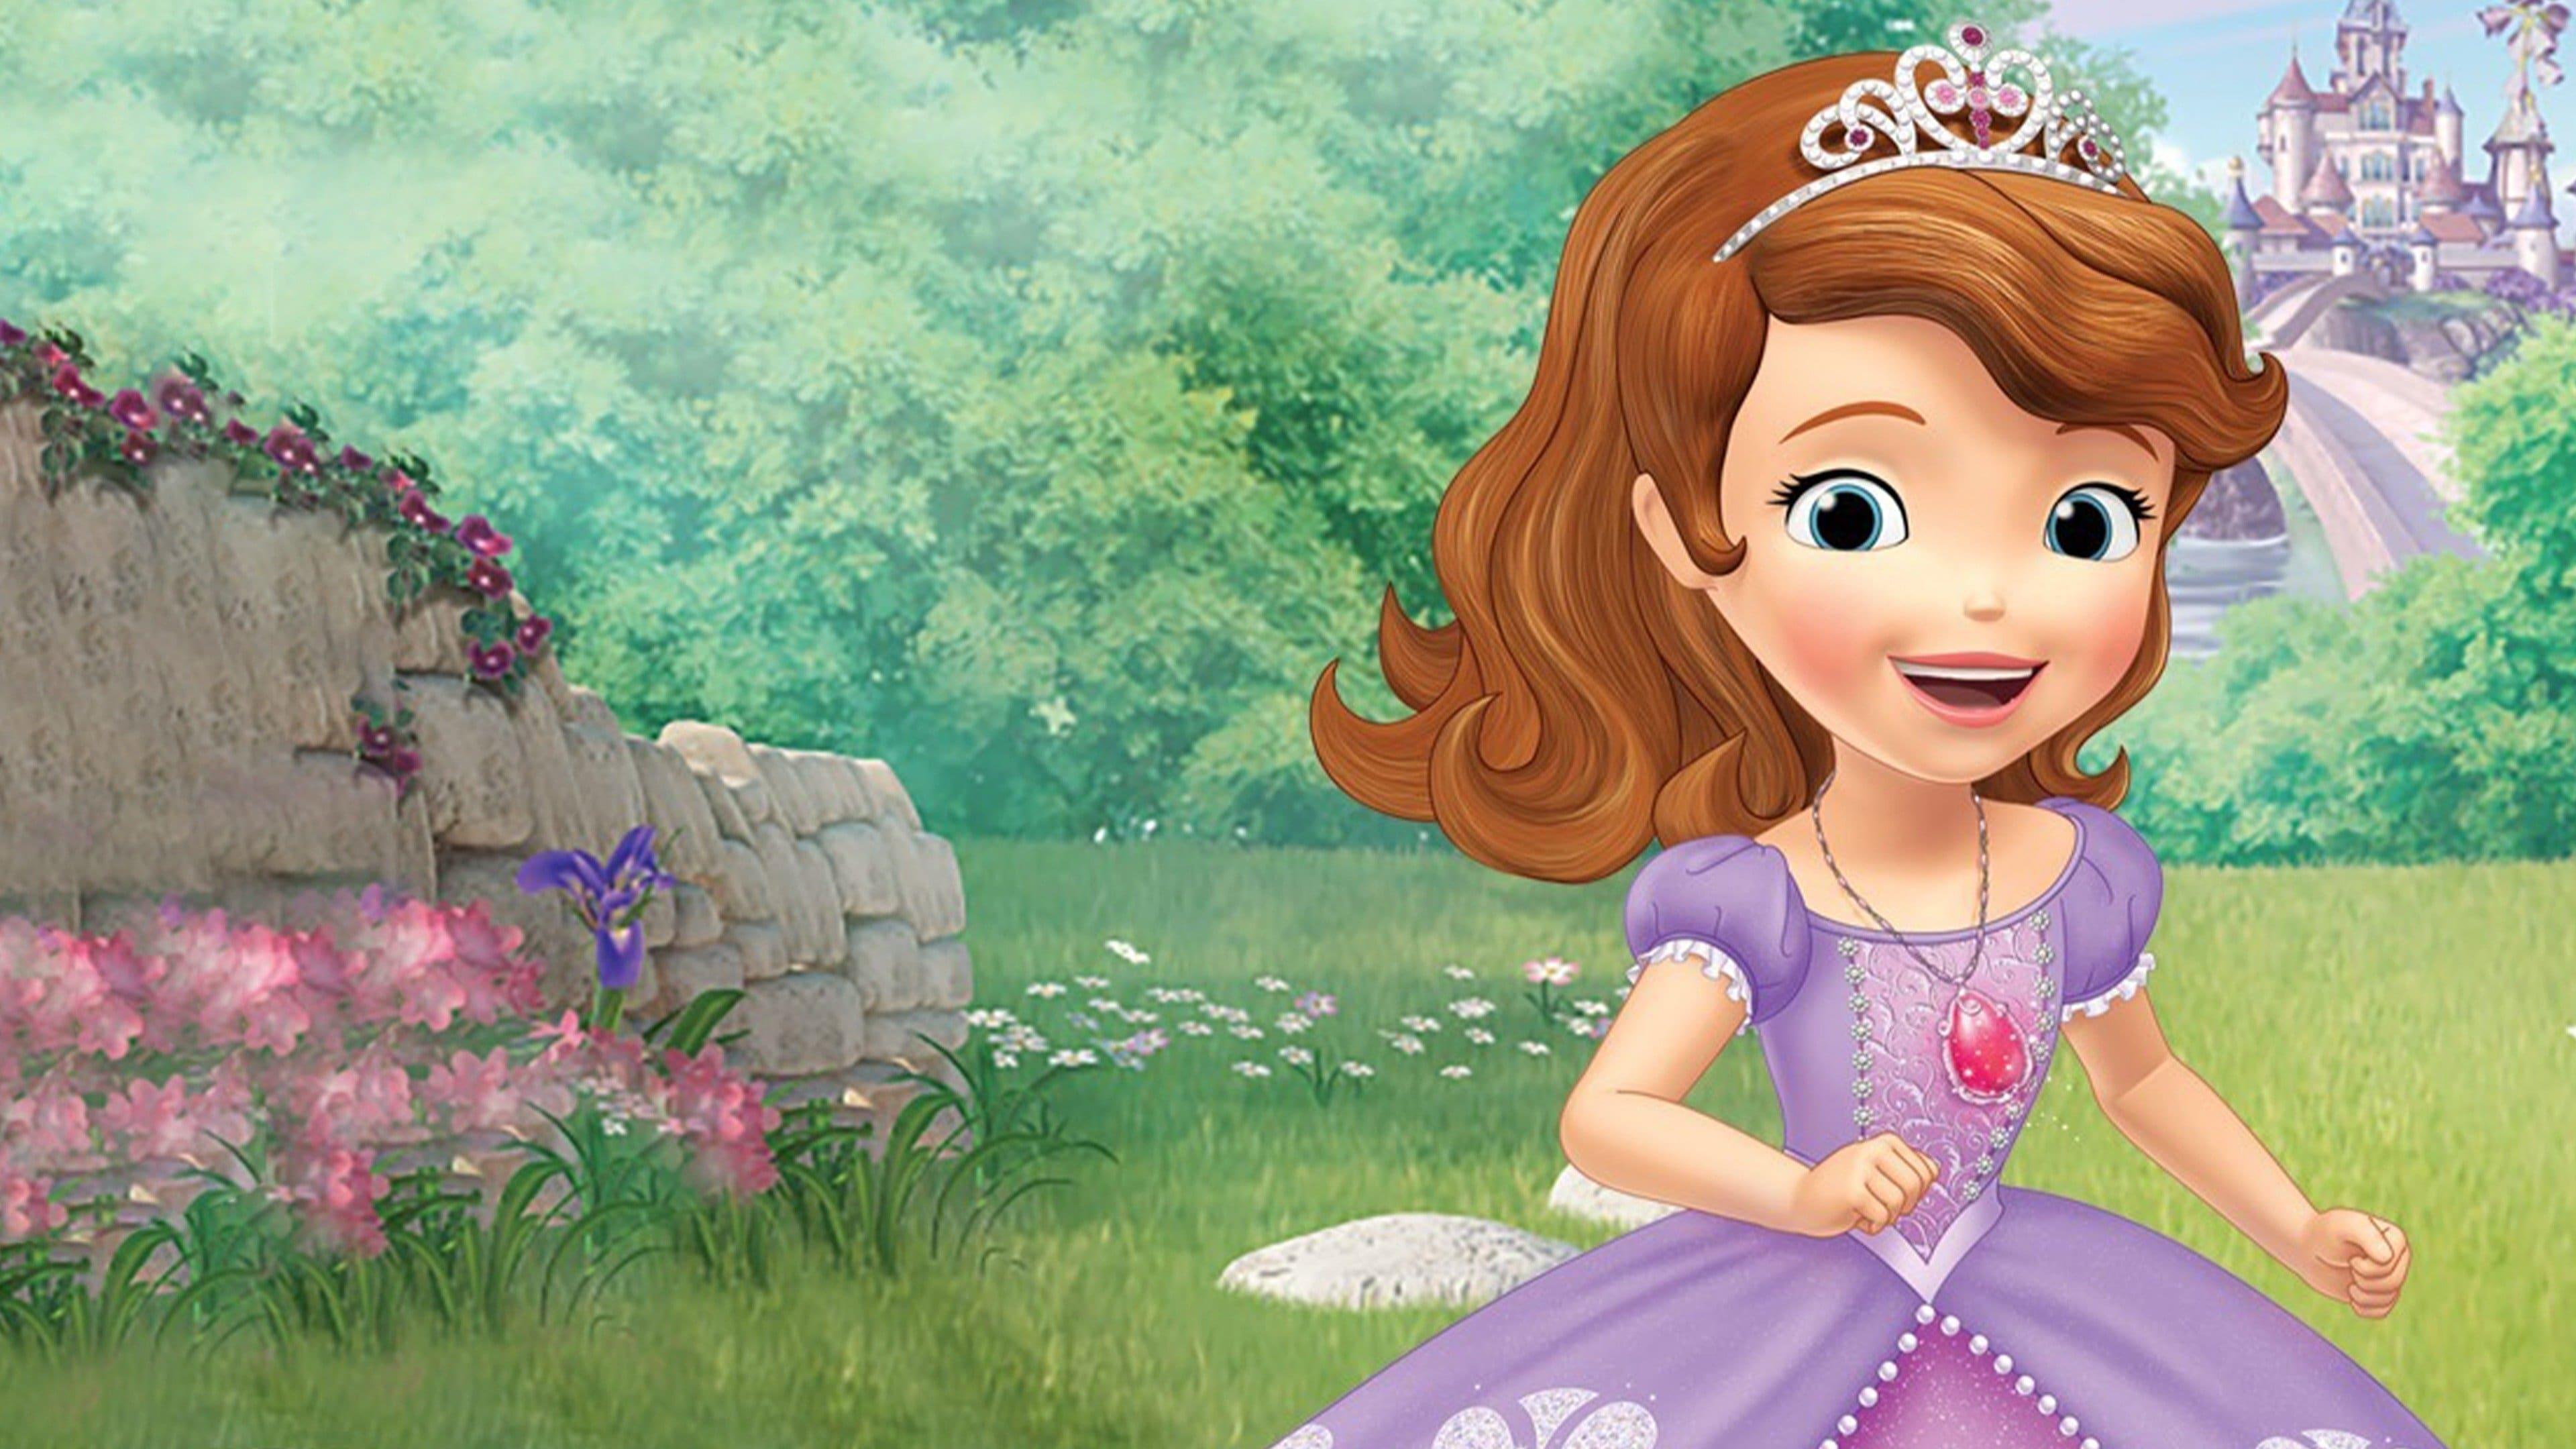 Sofia the First backdrop